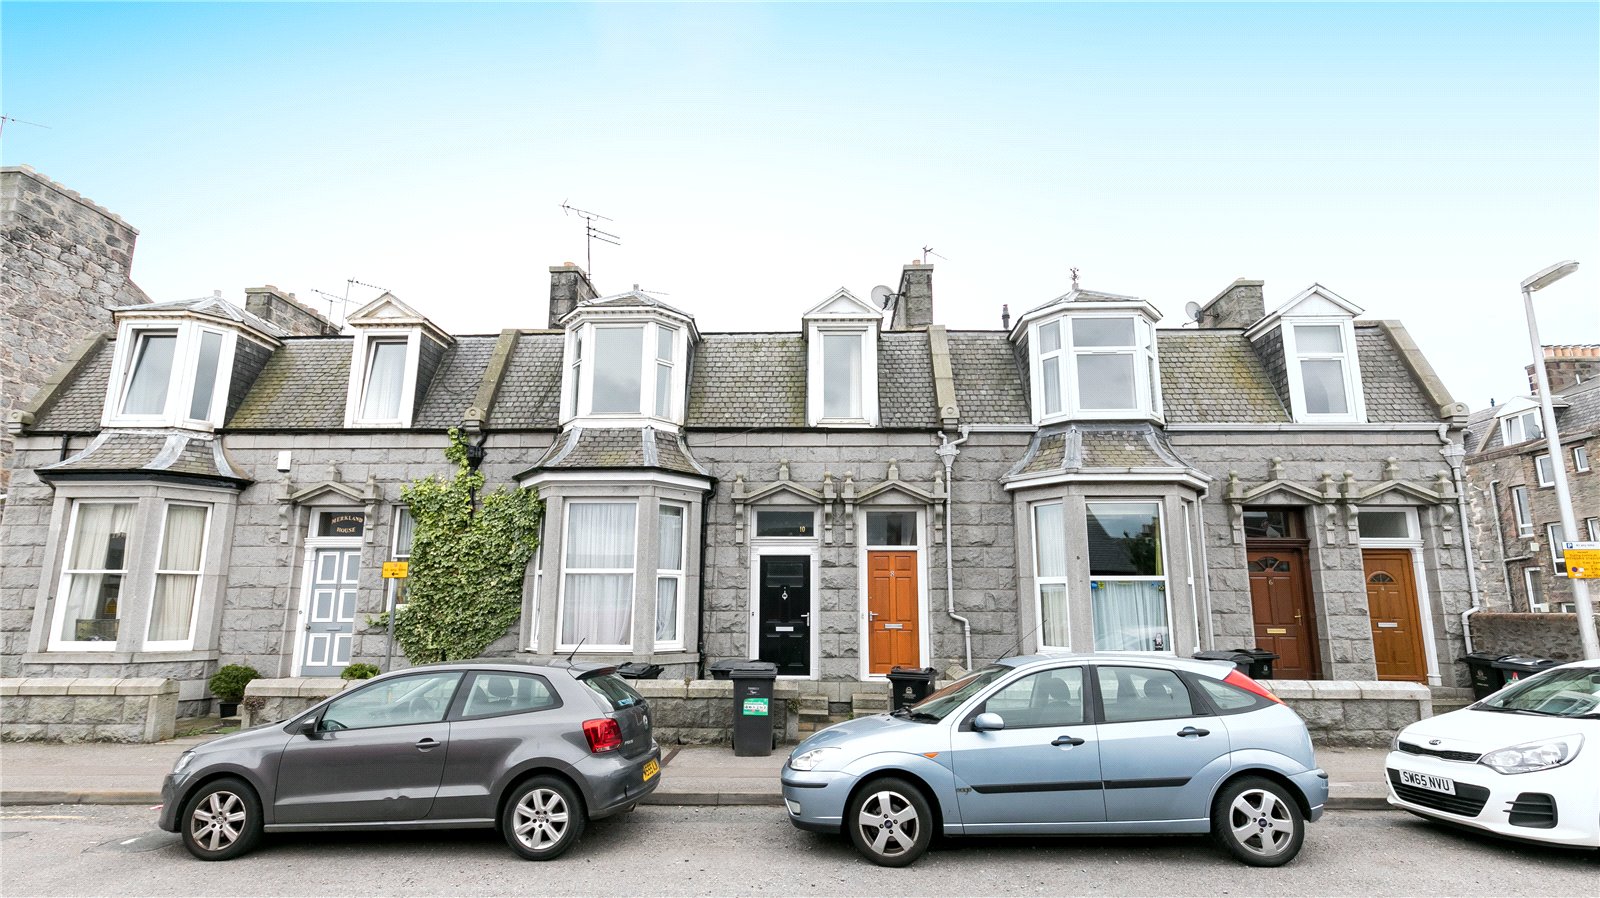 Our latest properties for sale and to let (9th April 2020)